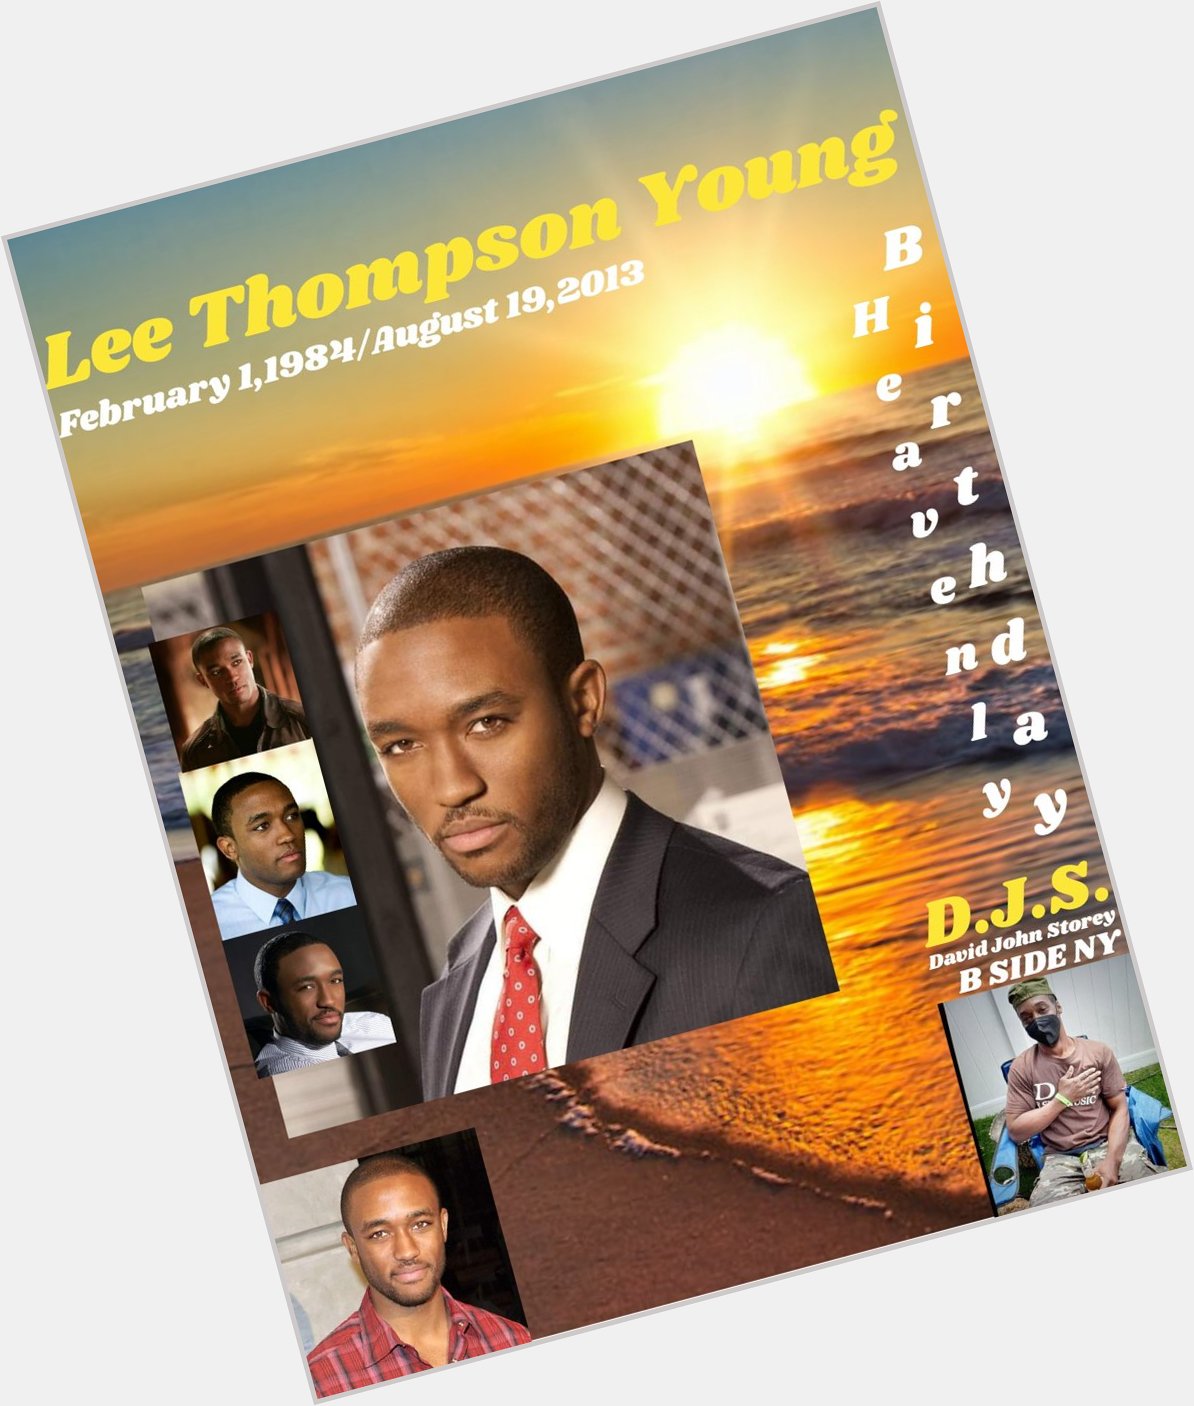 I(D.J.S.)\"B SIDE NY\" taking time to say Happy Heavenly Birthday to Actor: \"LEE THOMPSON YOUNG\". 